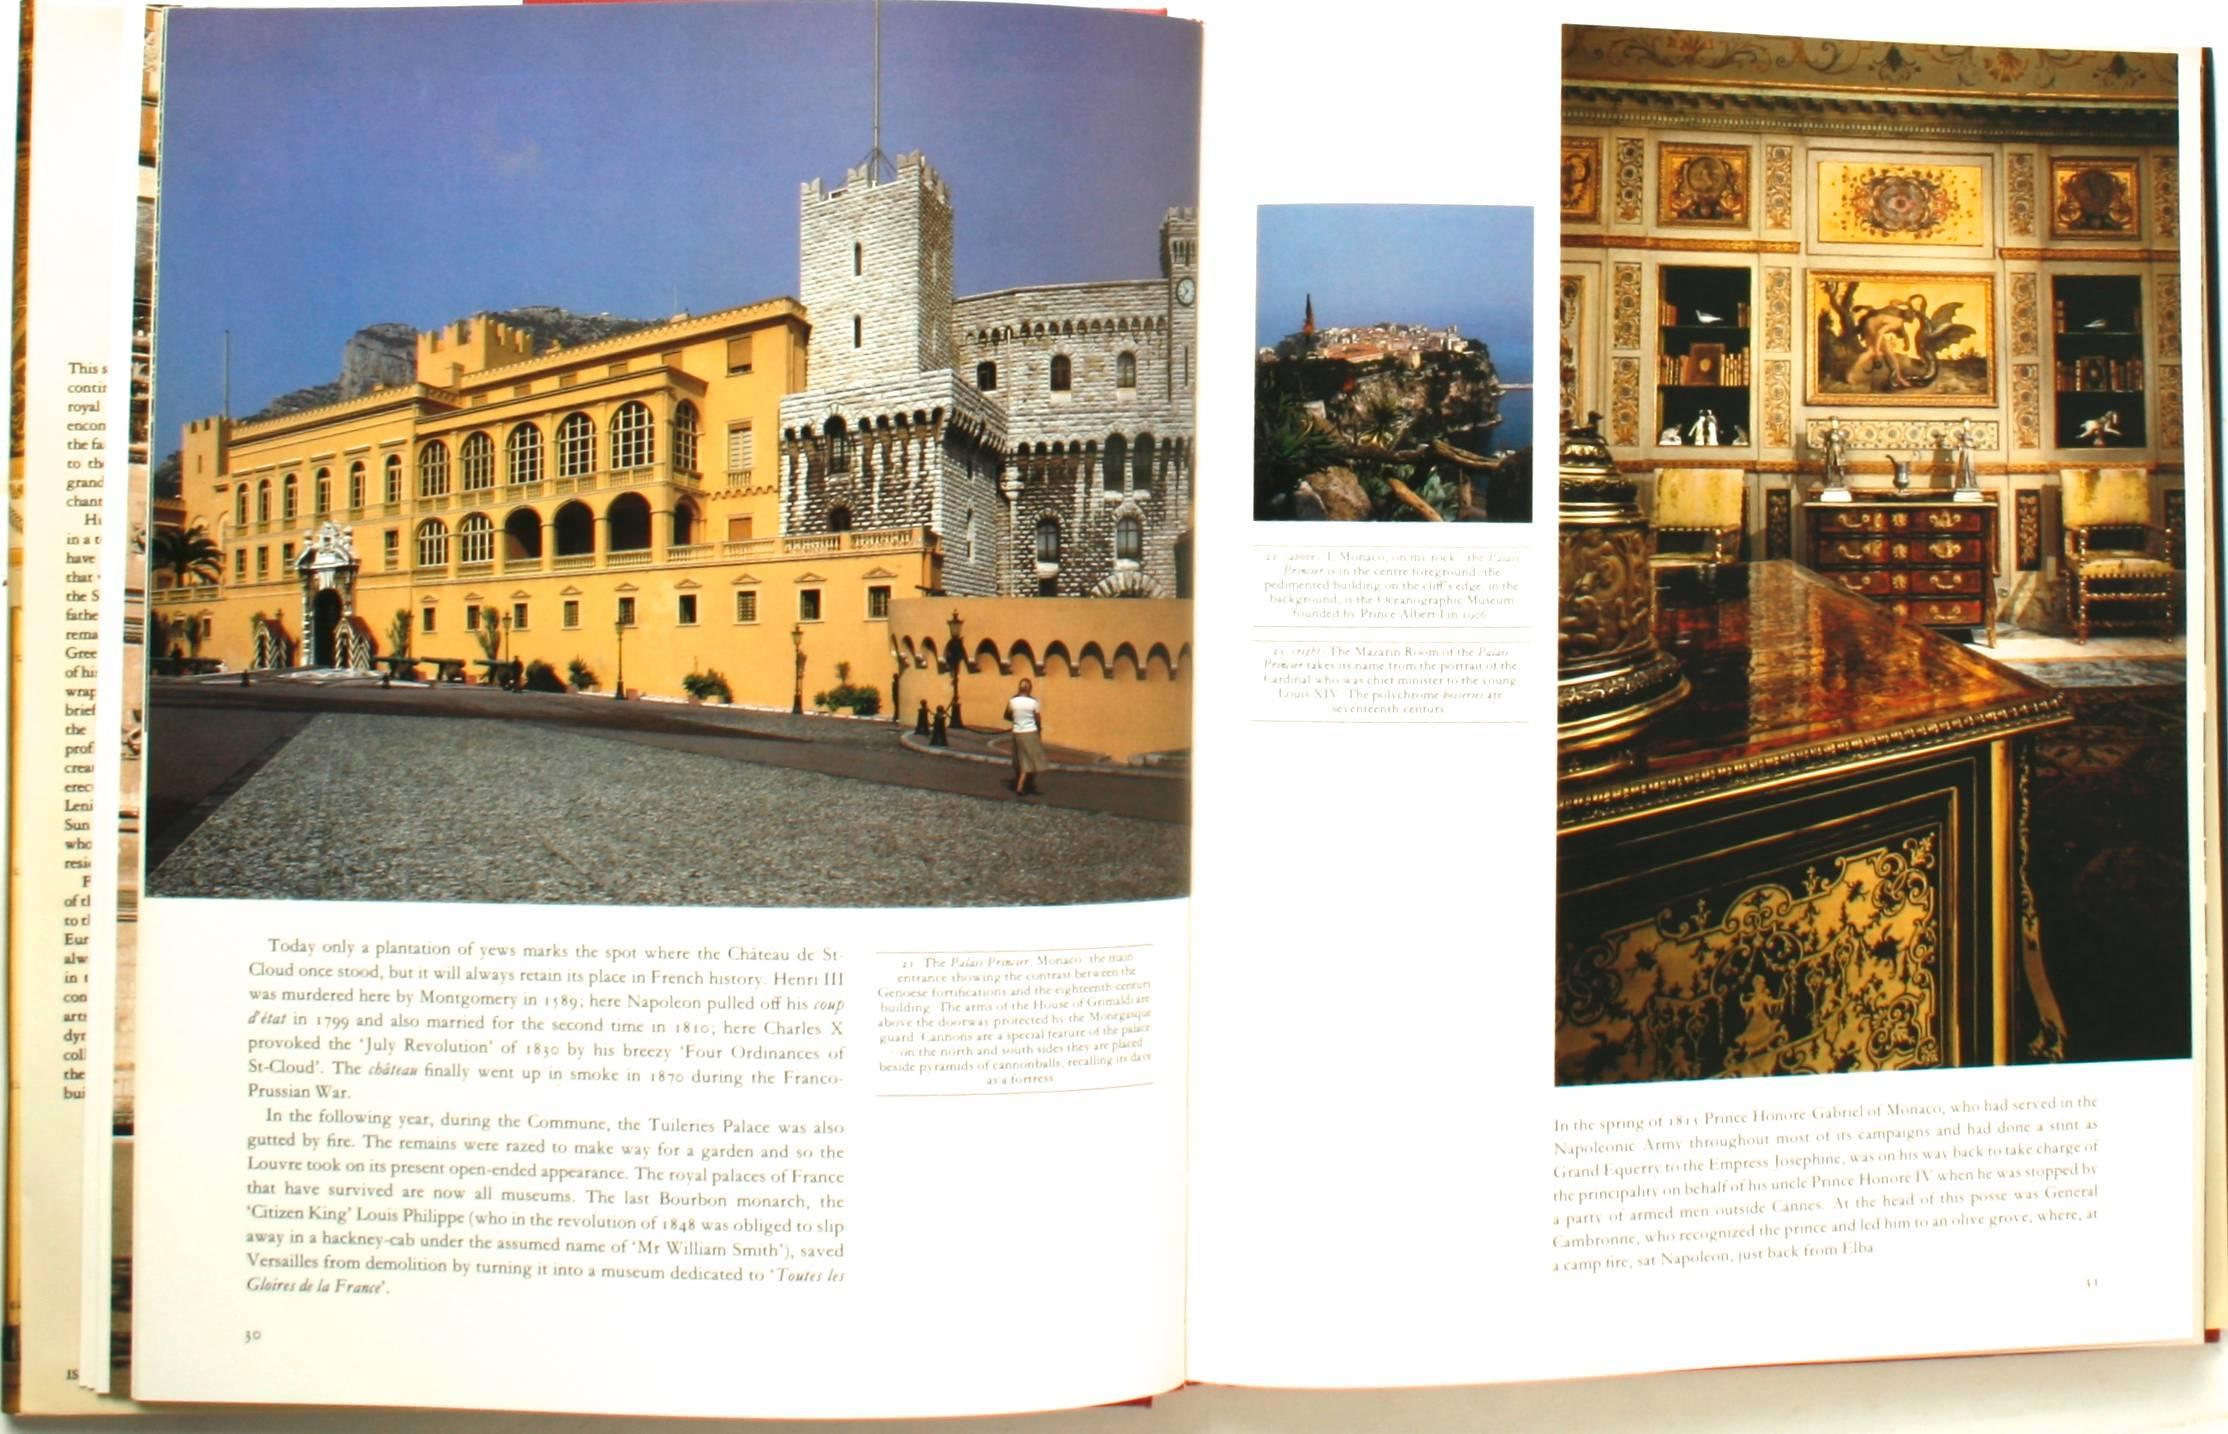 American Royal Palaces of Europe, First Edition